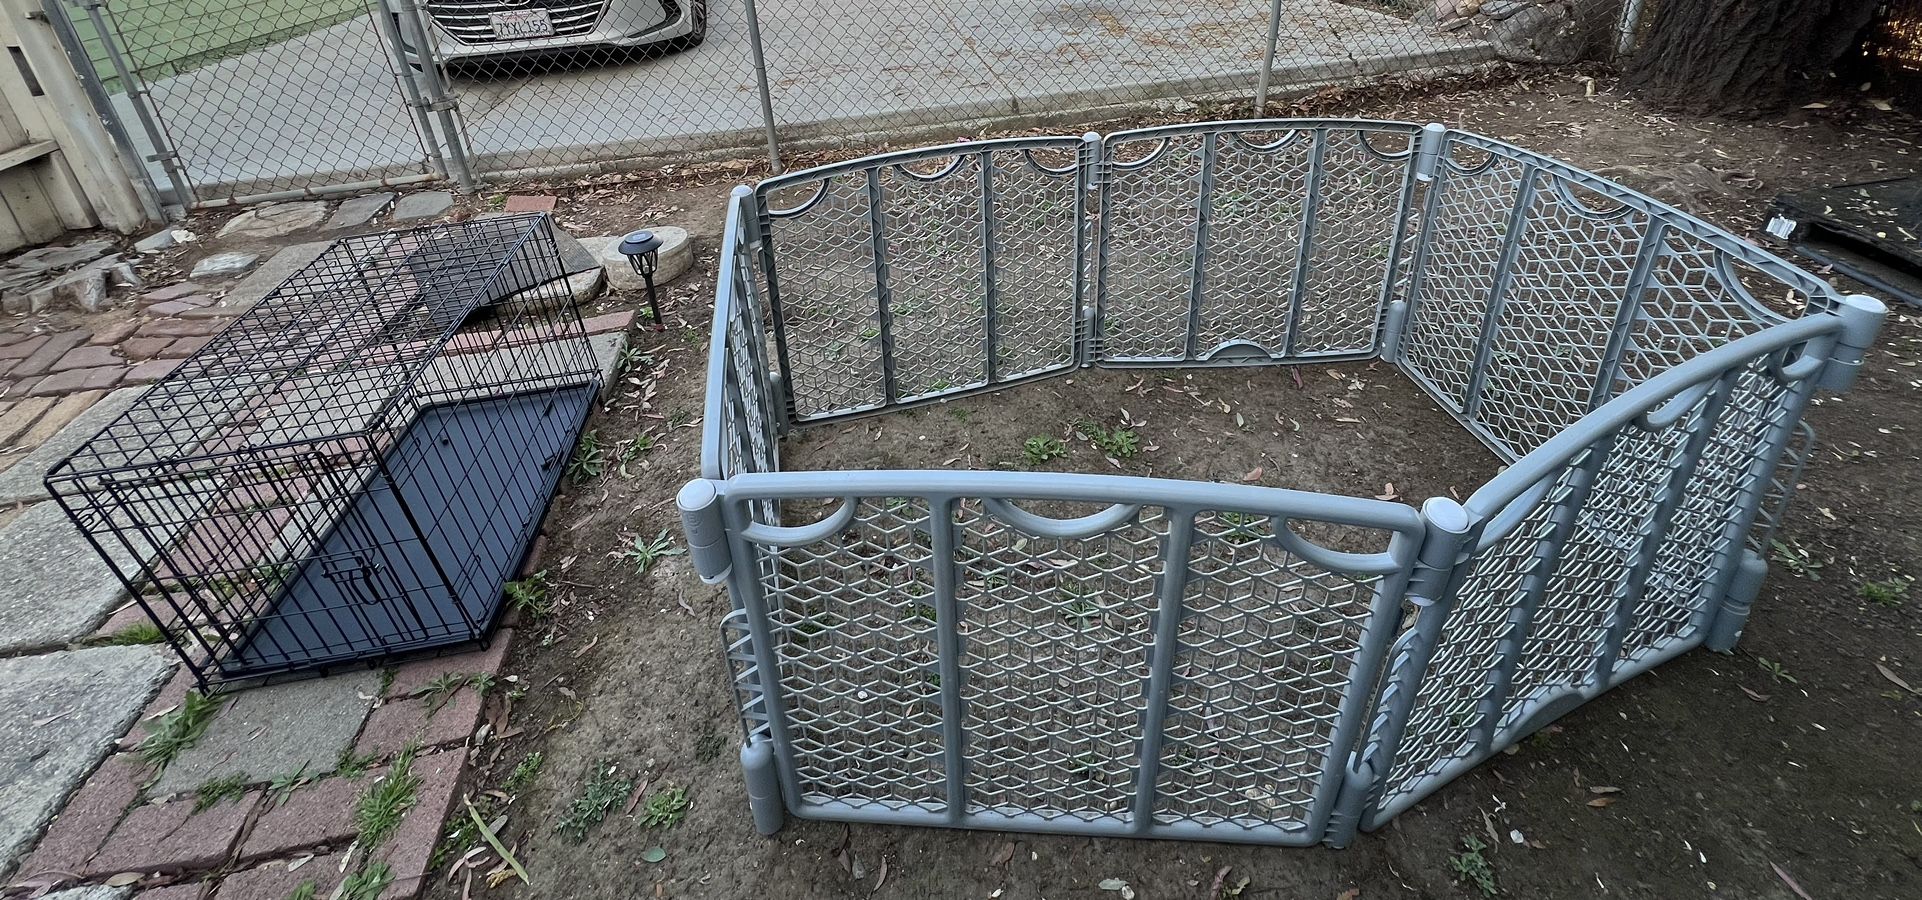 Cage and Corral for sale $60 for both.